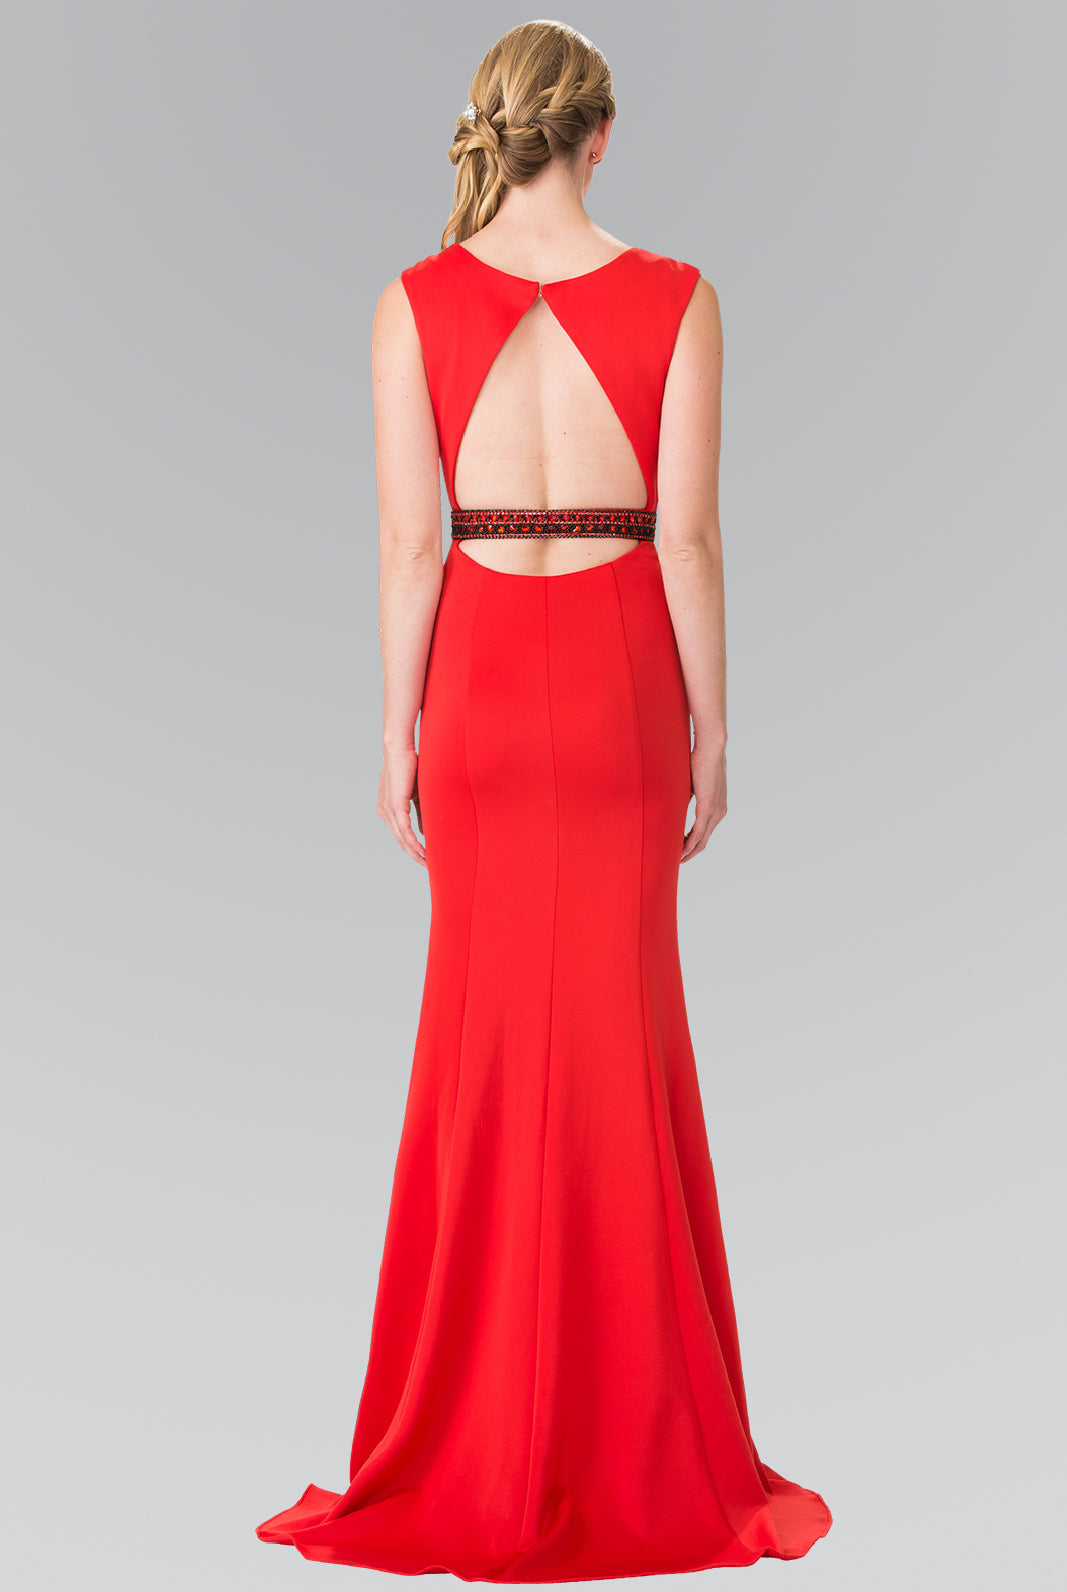 Beaded Waist Line Jersey Dress with Cut-Out Back-smcdress